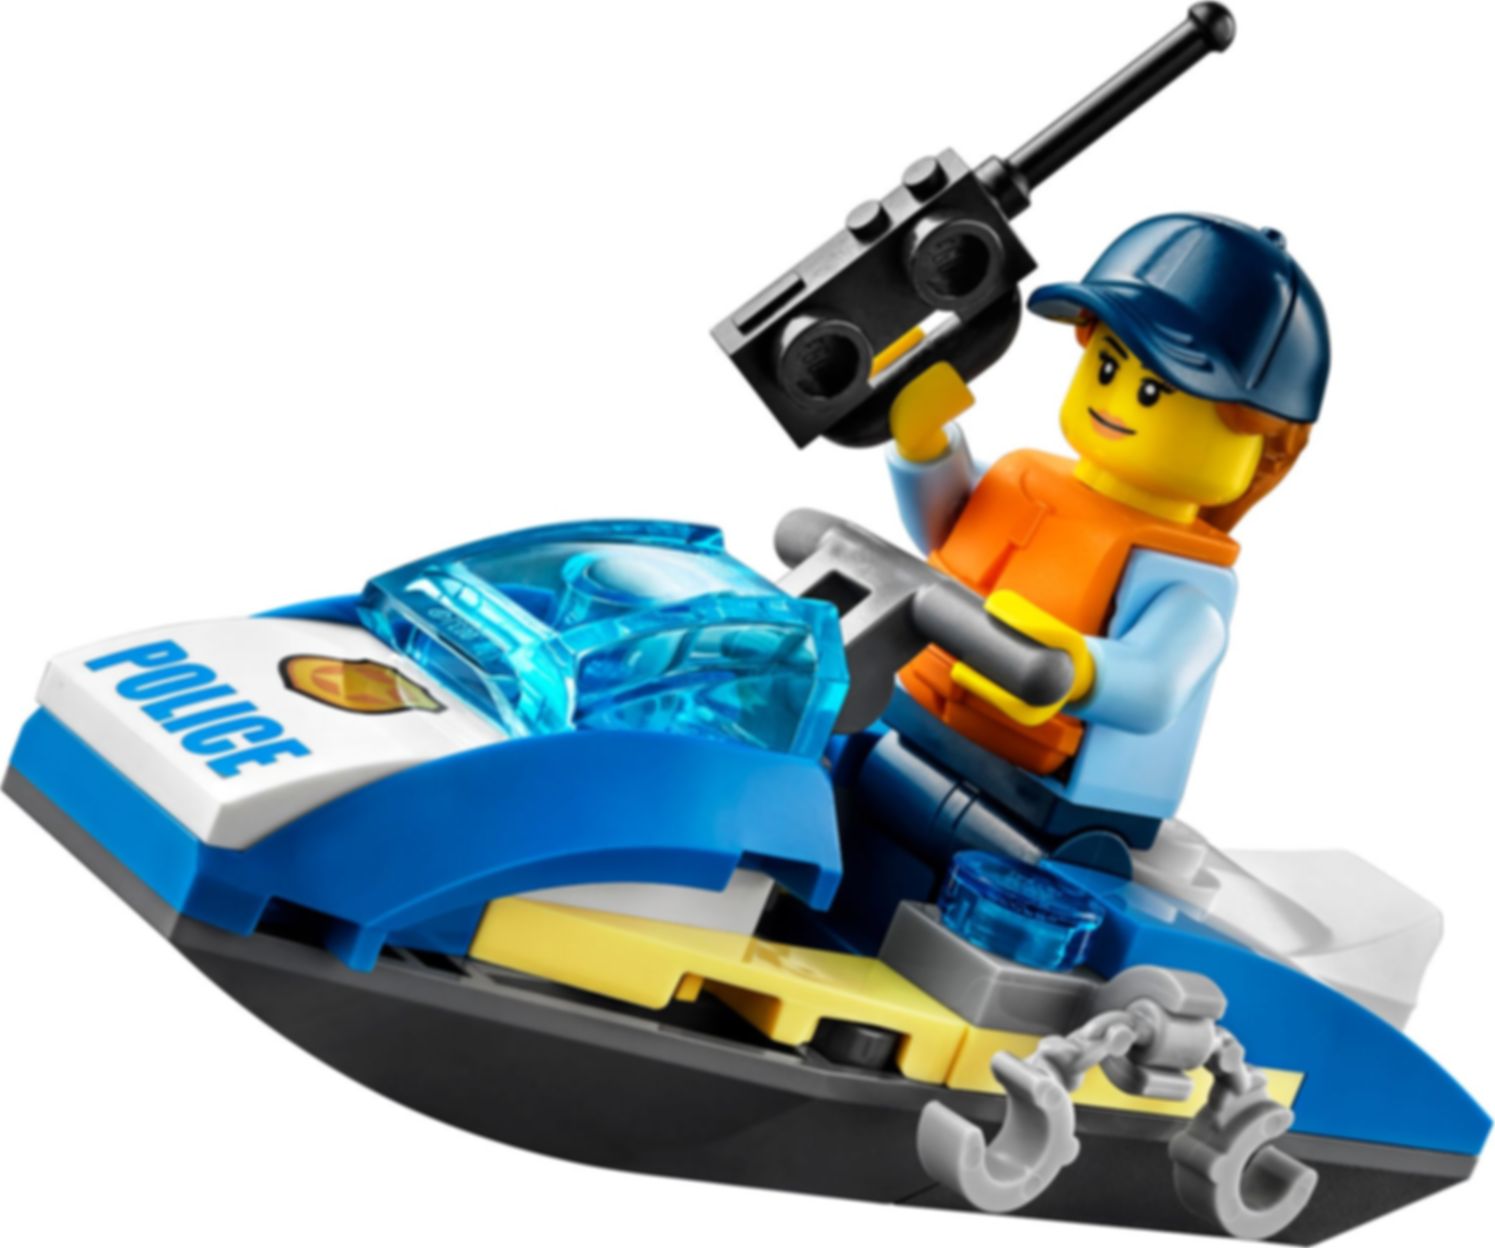 LEGO® City Police Water Scooter components